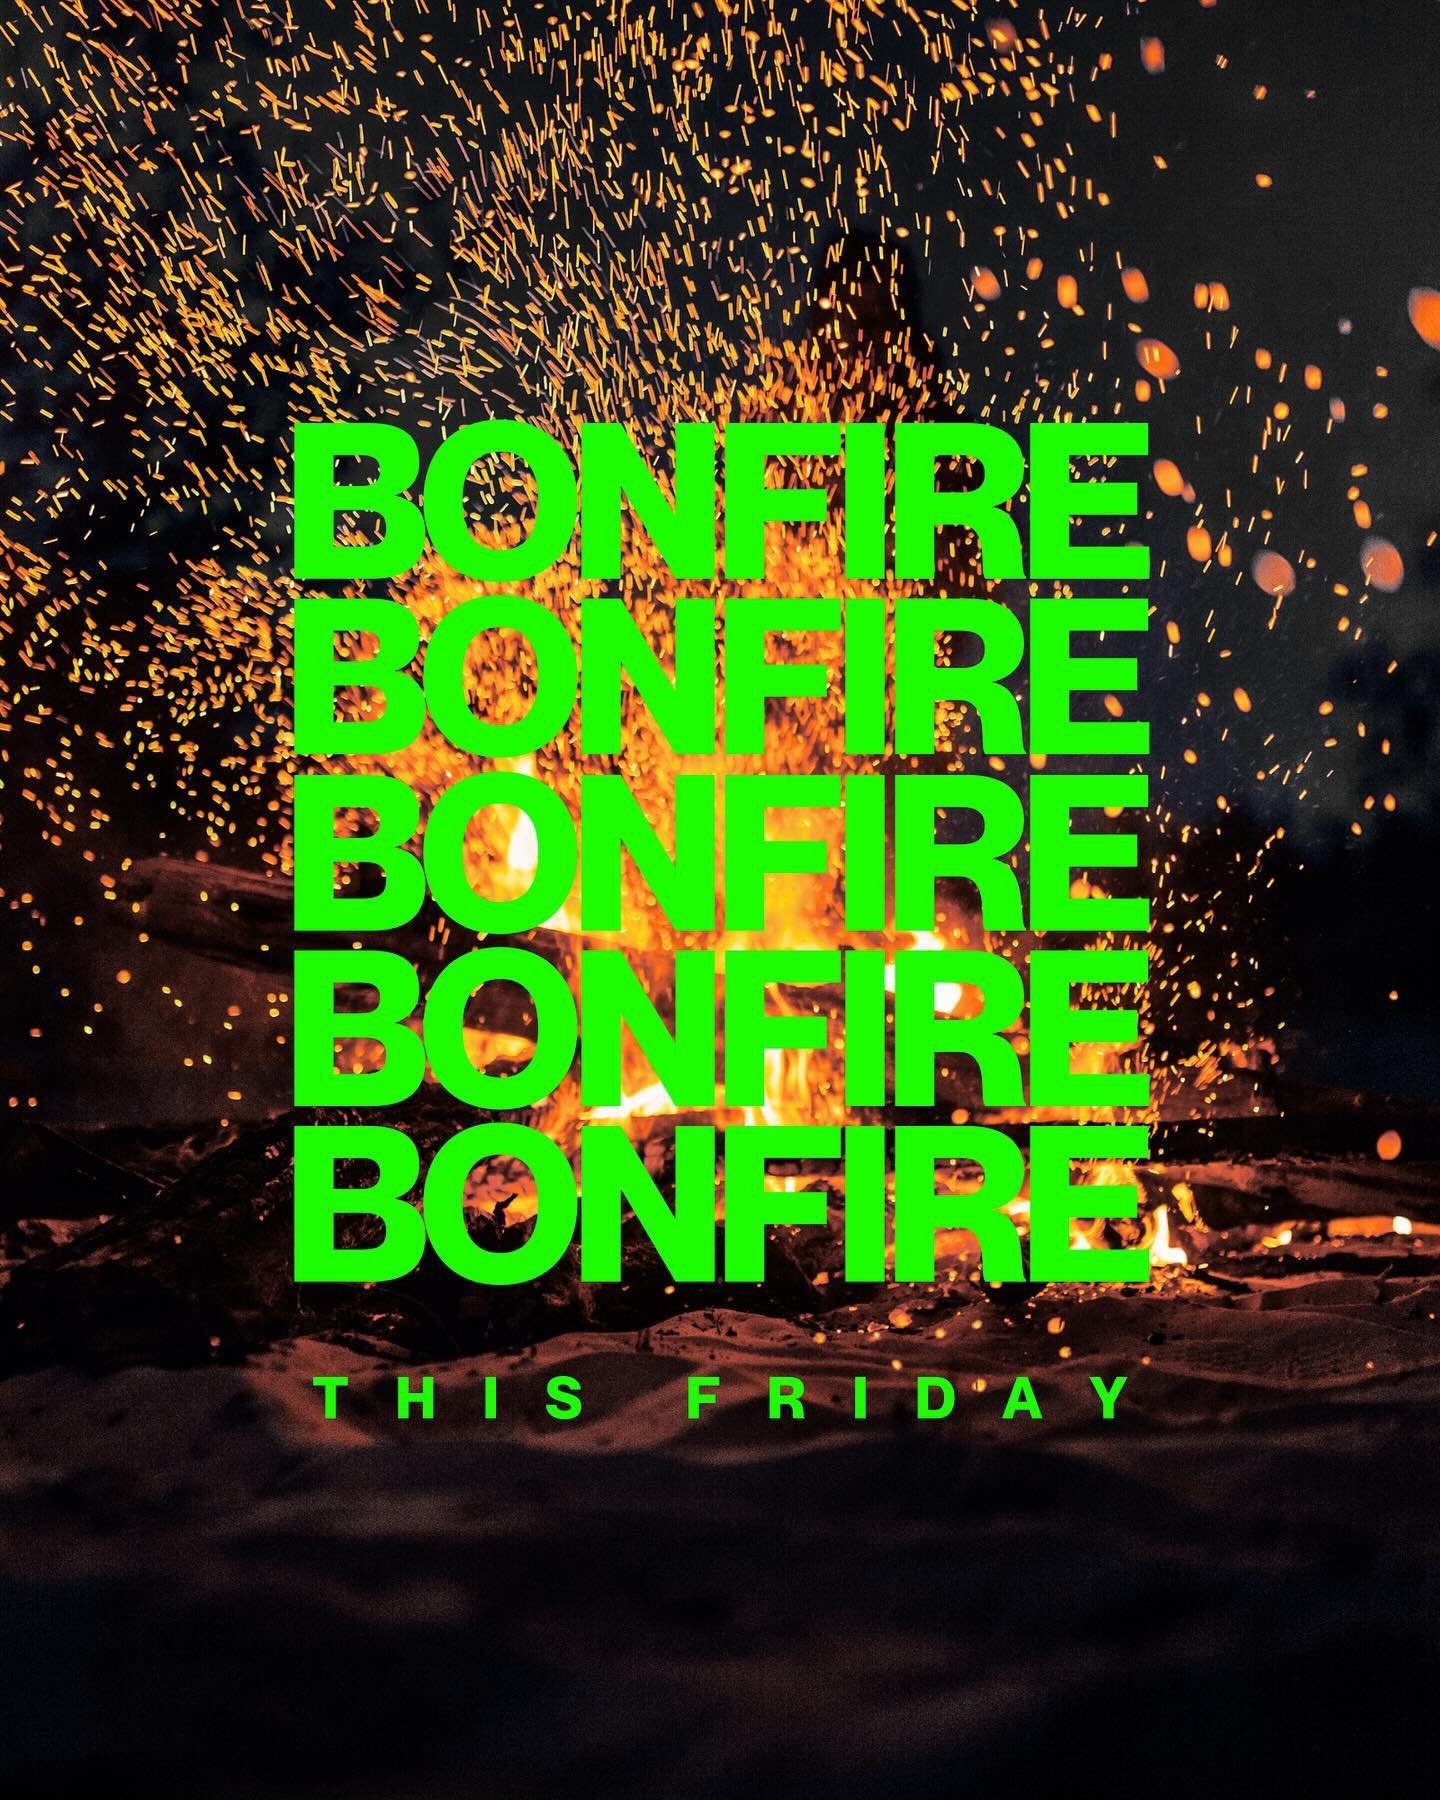 BONFIRE NIGHT, THIS FRIDAY
-
We&rsquo;re gonna be heading down the back and lighting up a bonfire!

BRING SNACKS
BRING A FRIEND
BRING YOUR BIBLE

We&rsquo;ll see you on Friday